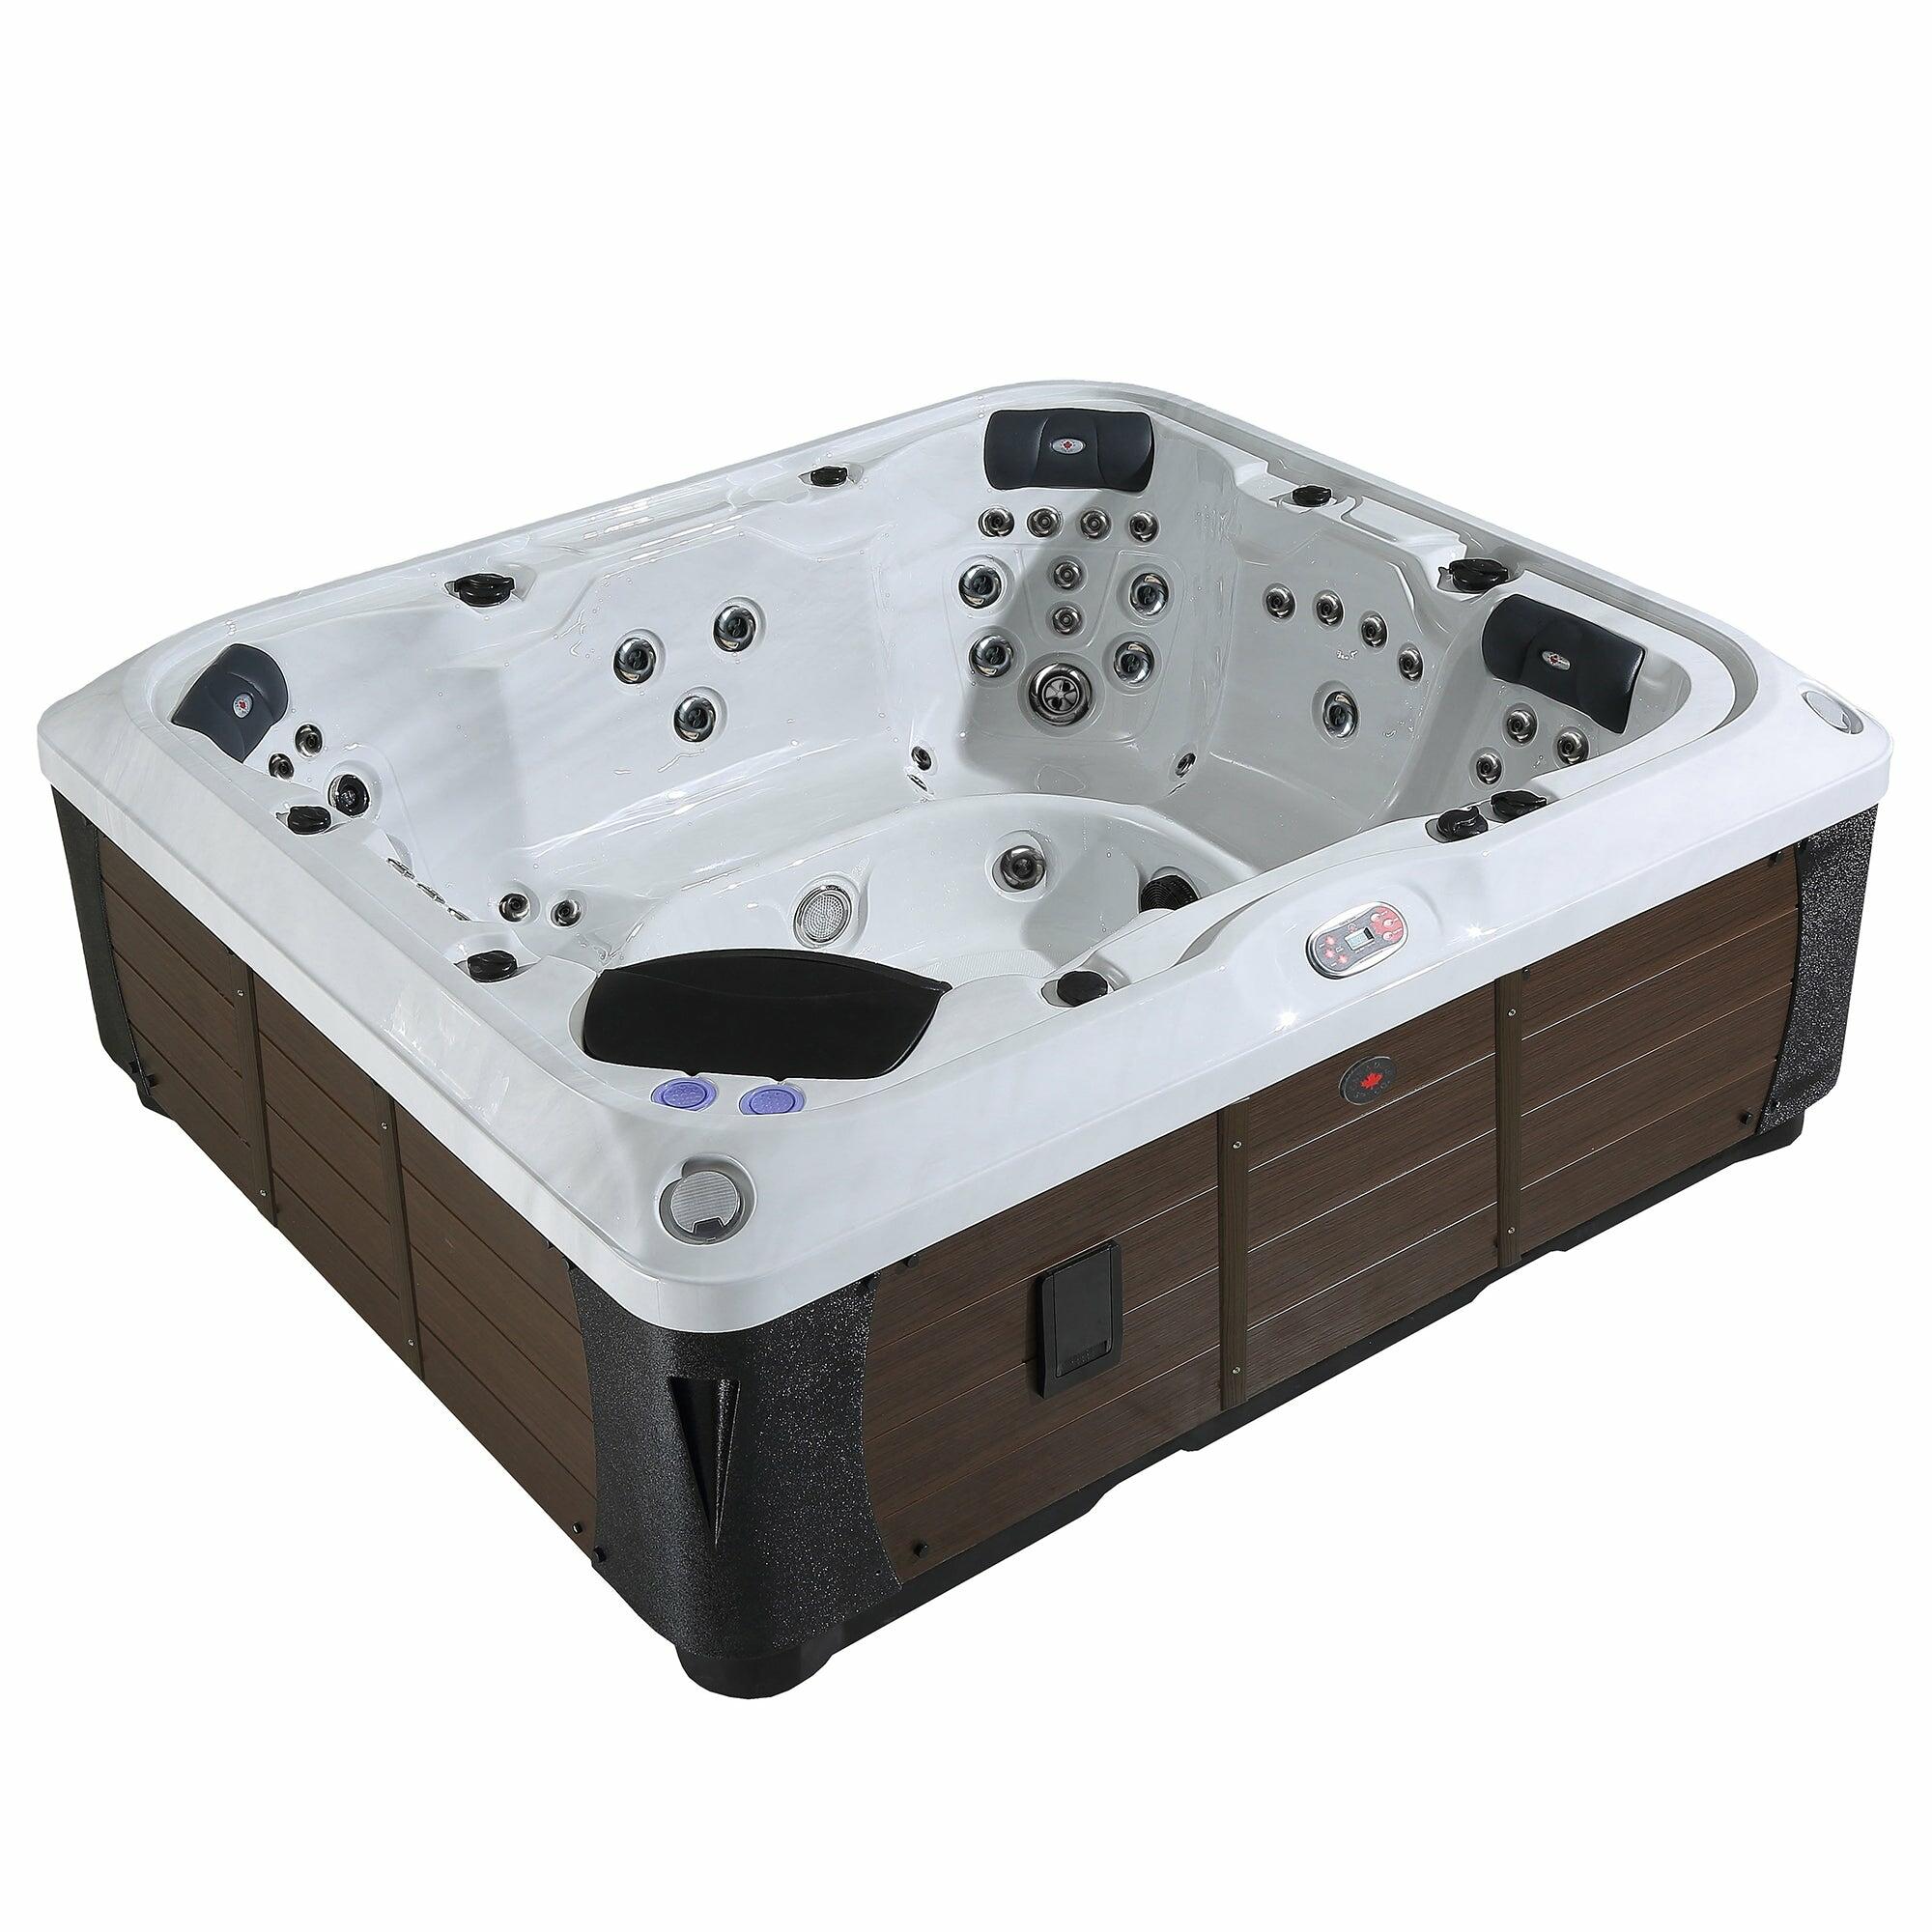 An image of Canadian Spa Alberta 57 Jet 6 Person Hot Tub